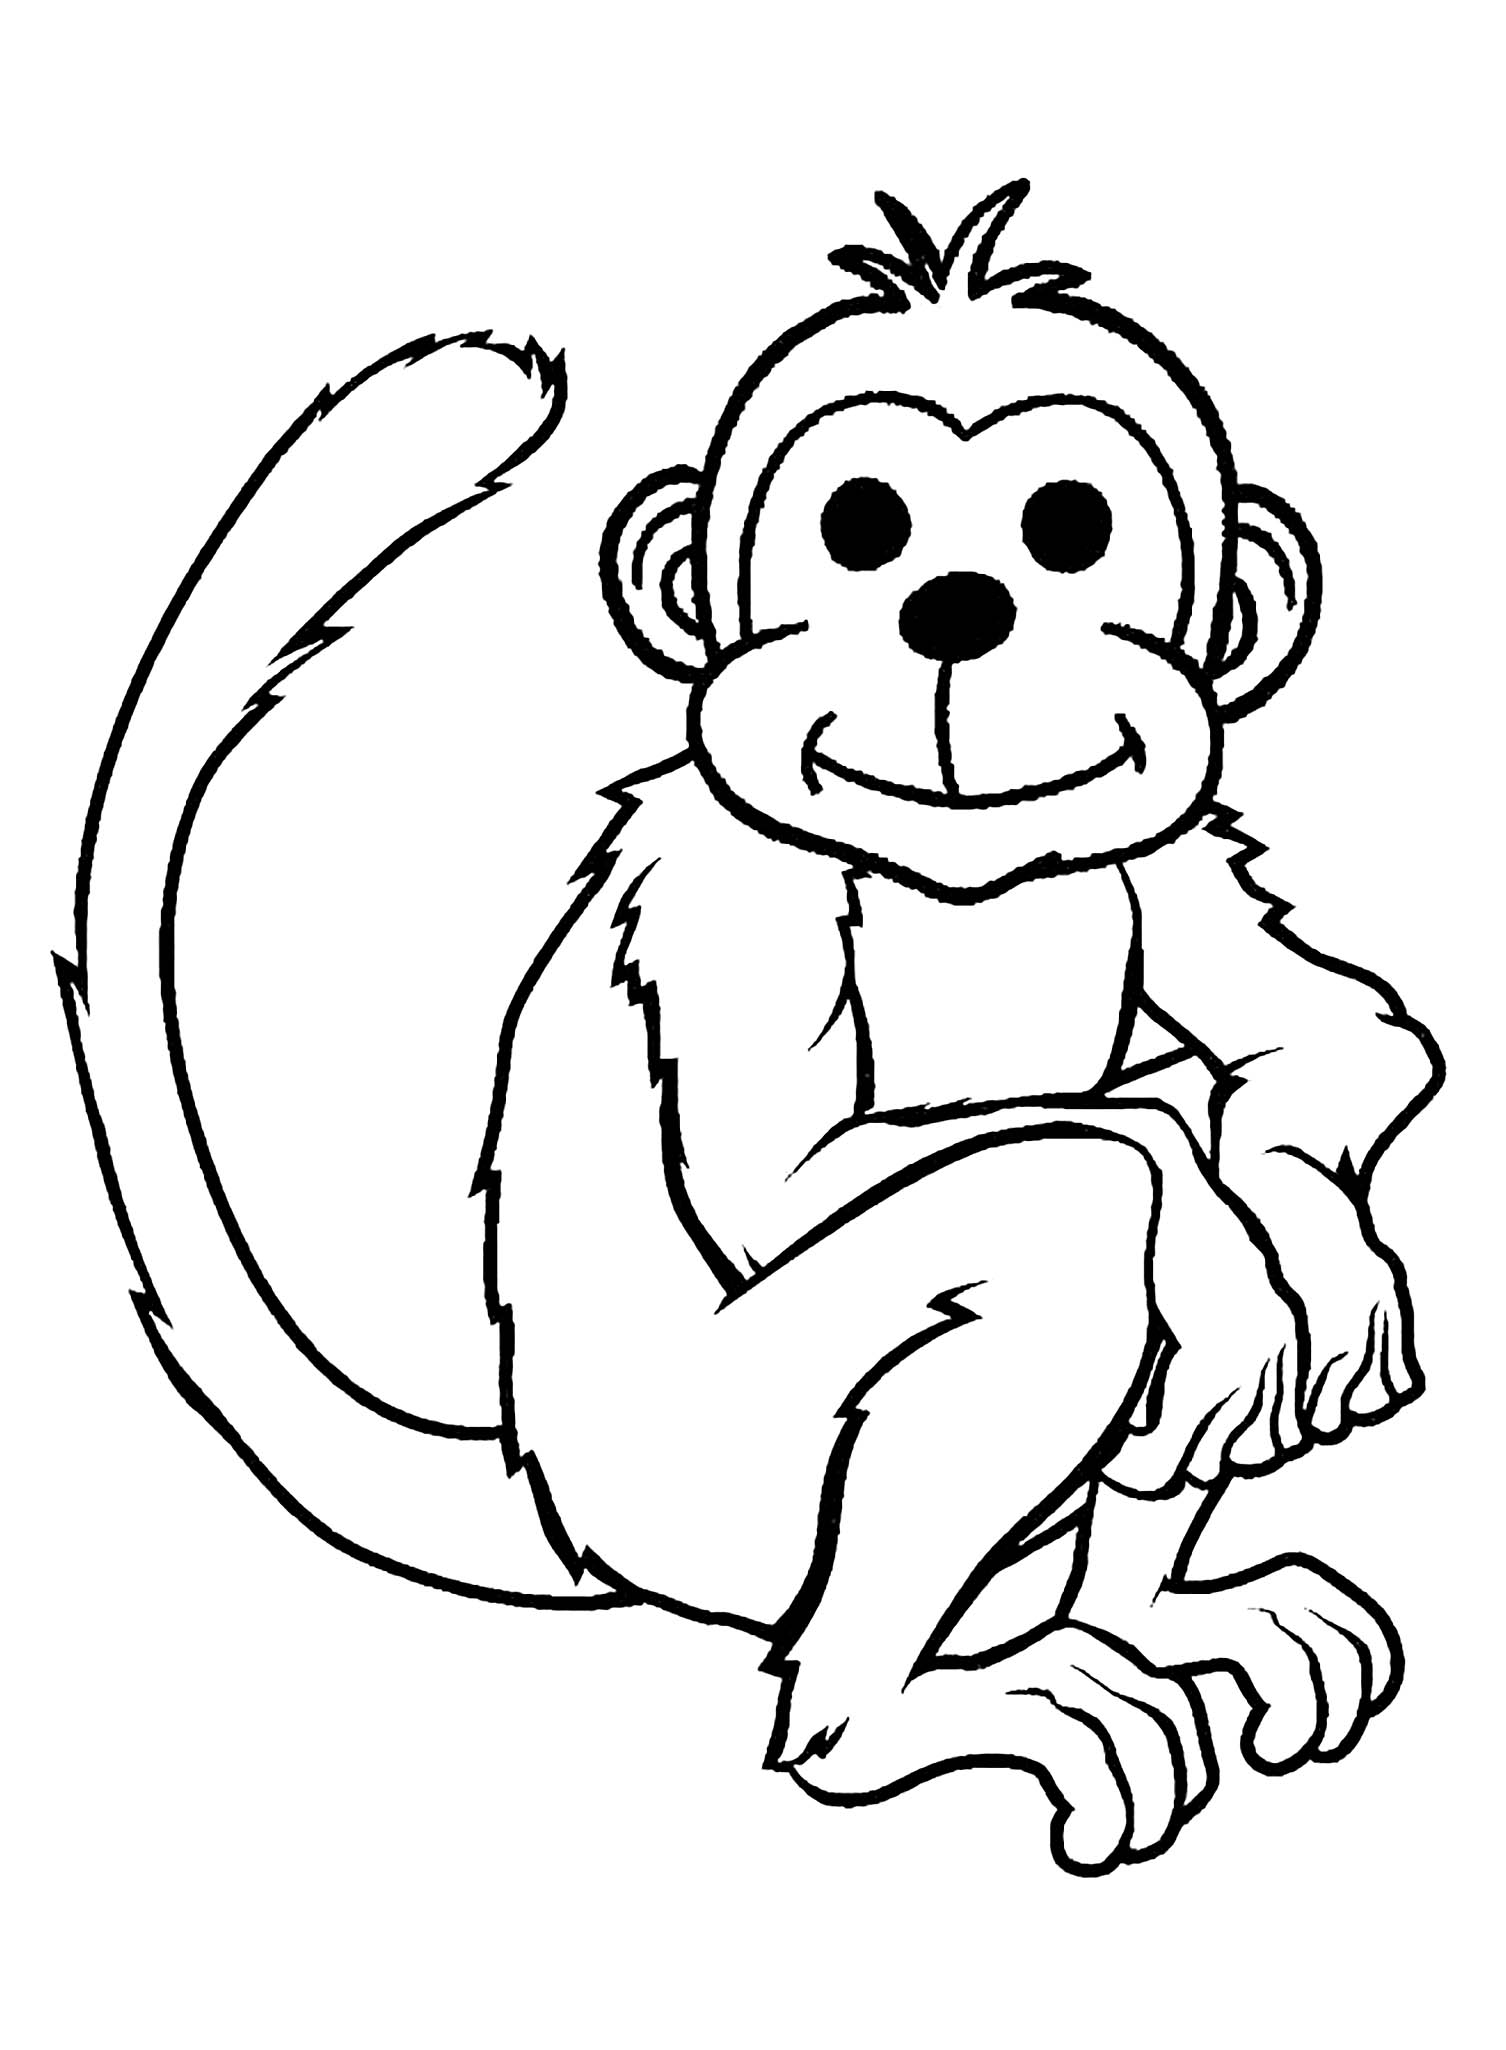 printable-monkey-coloring-pages